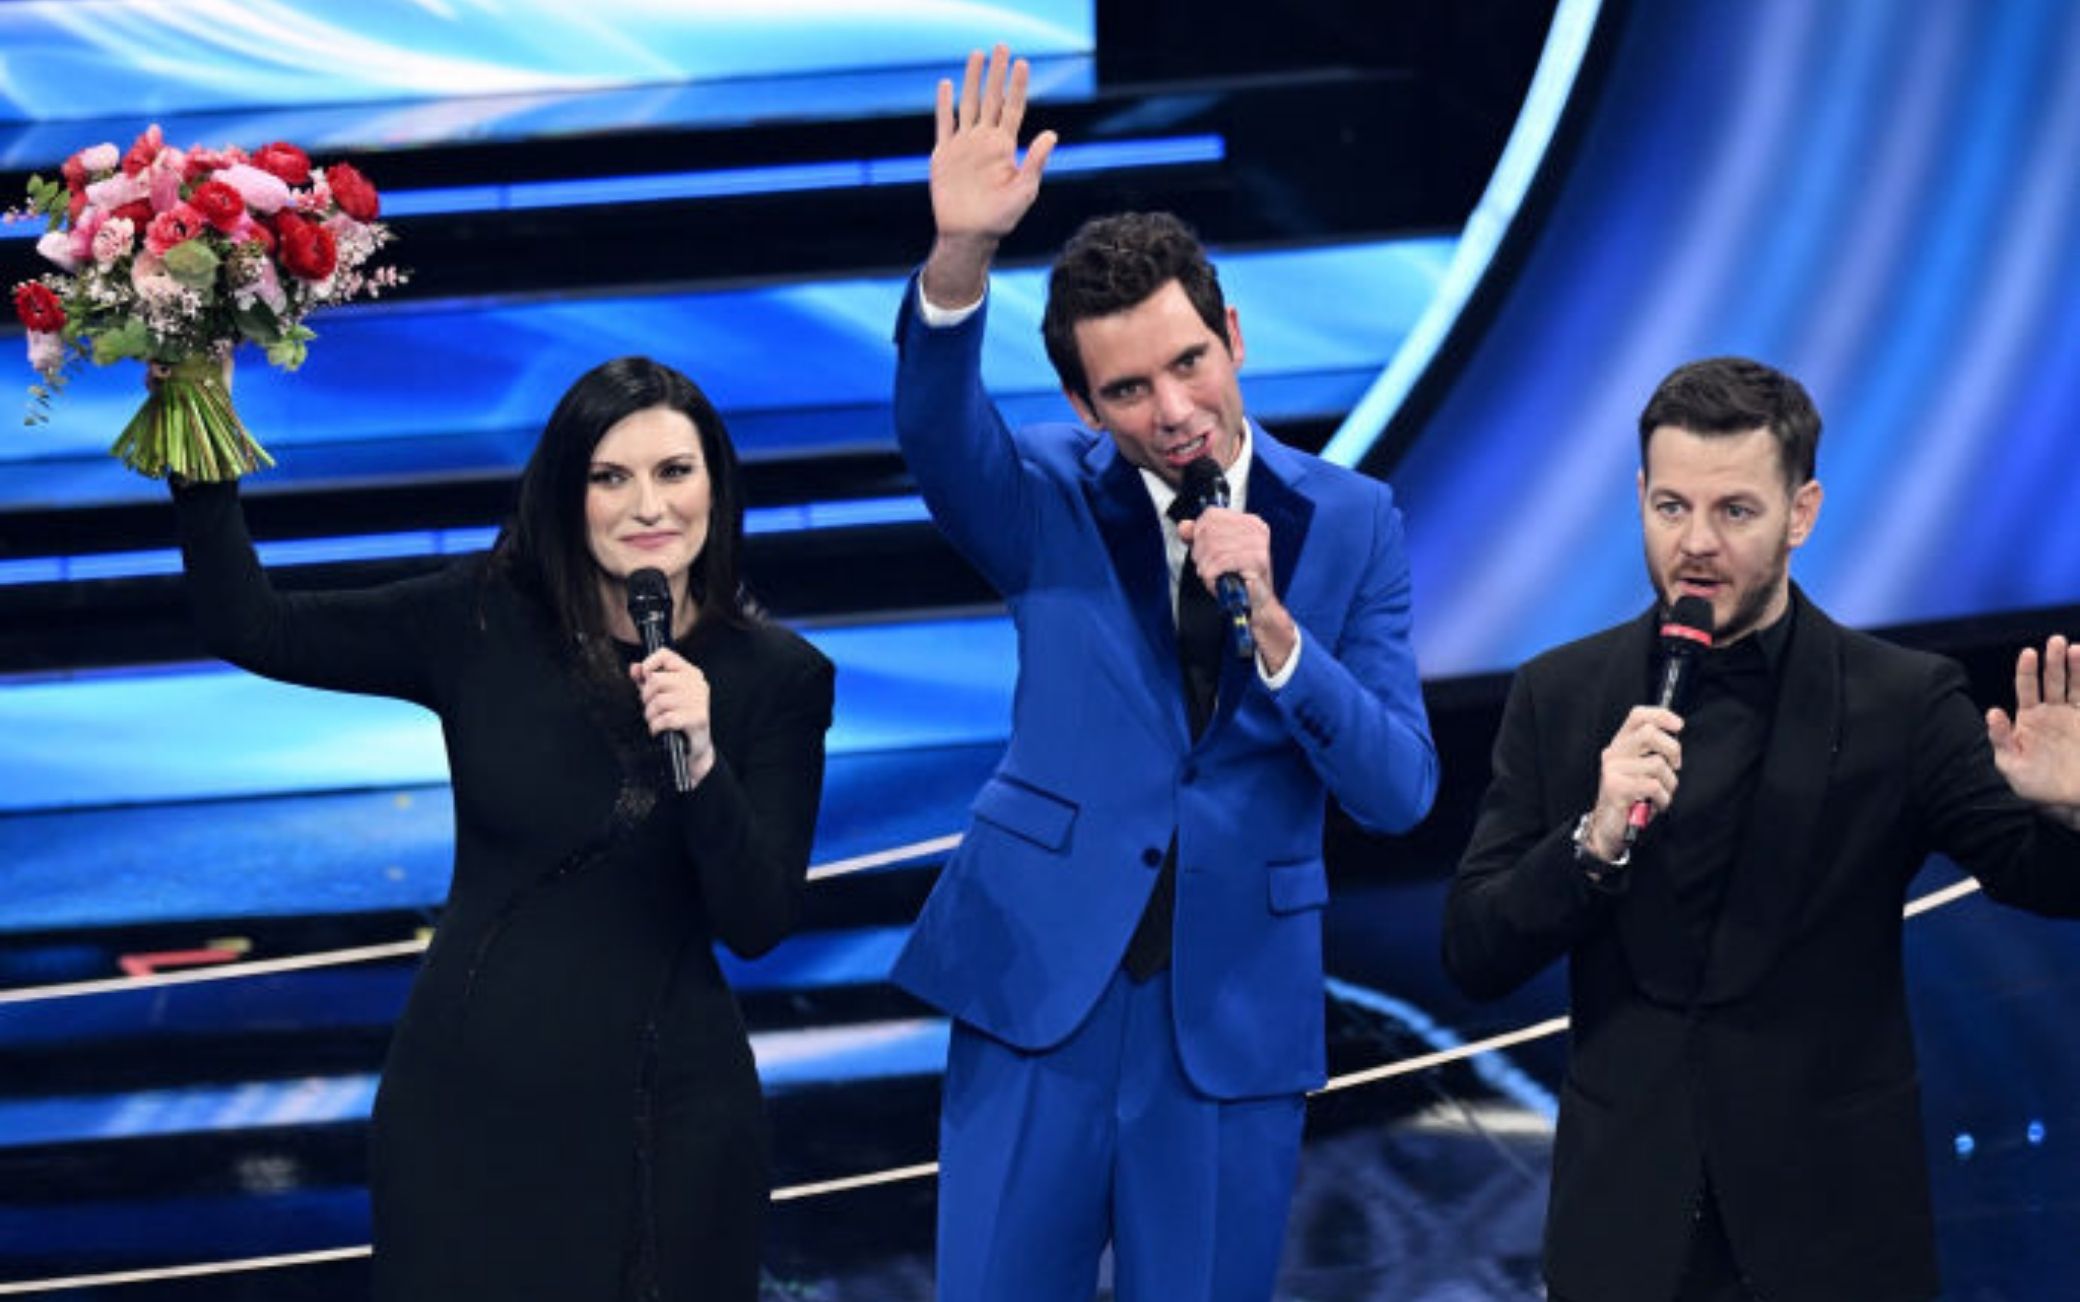 Eurovision 2022, the hosts will be Laura Pausini, Mika and Cattelan